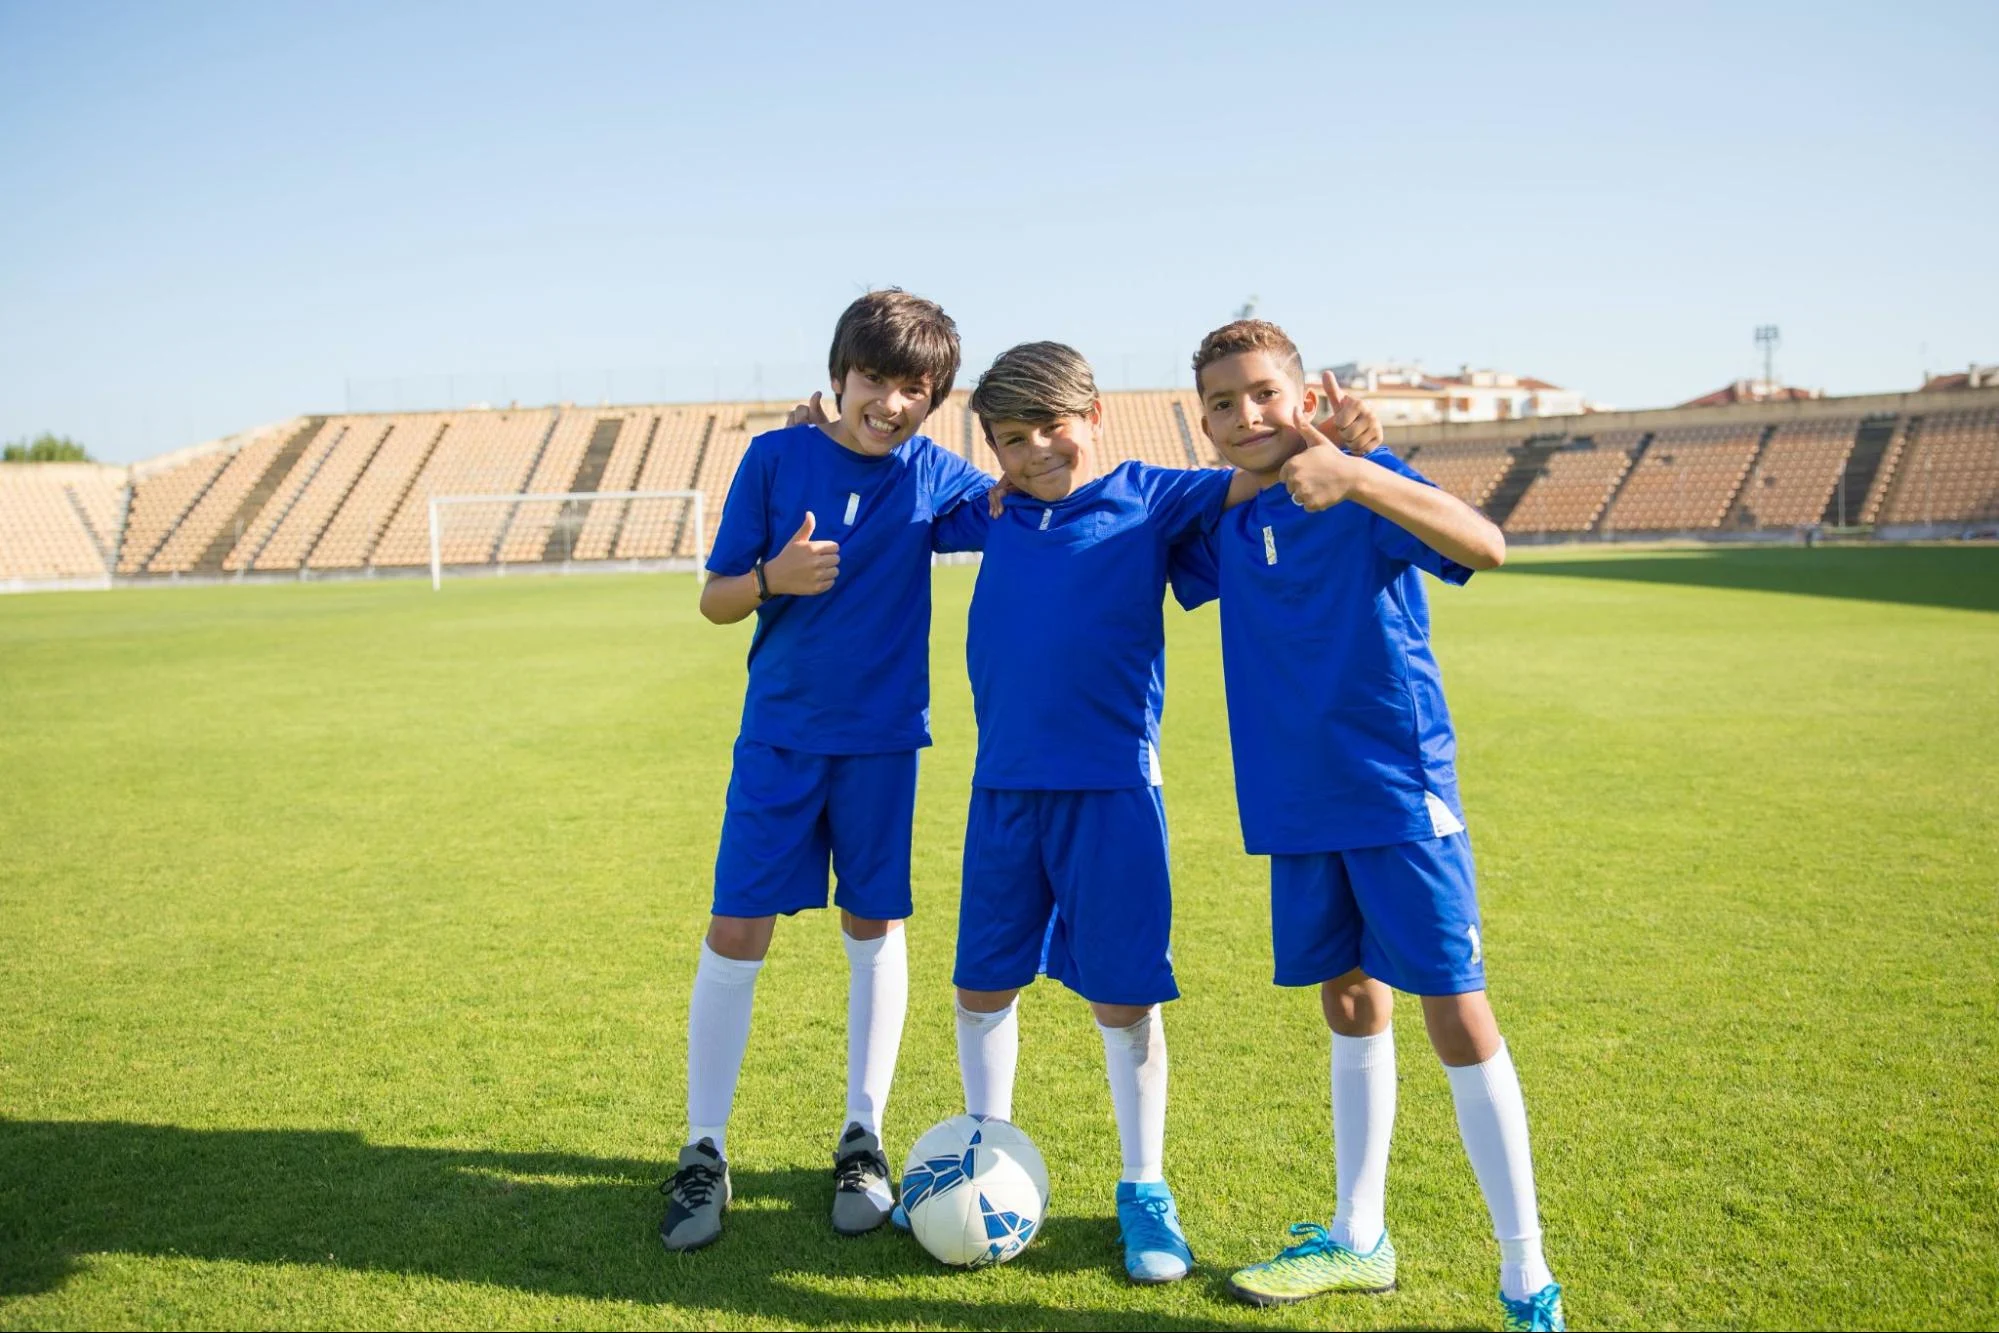 Young Soccer Players ?w=3840&q=75&fm=webp